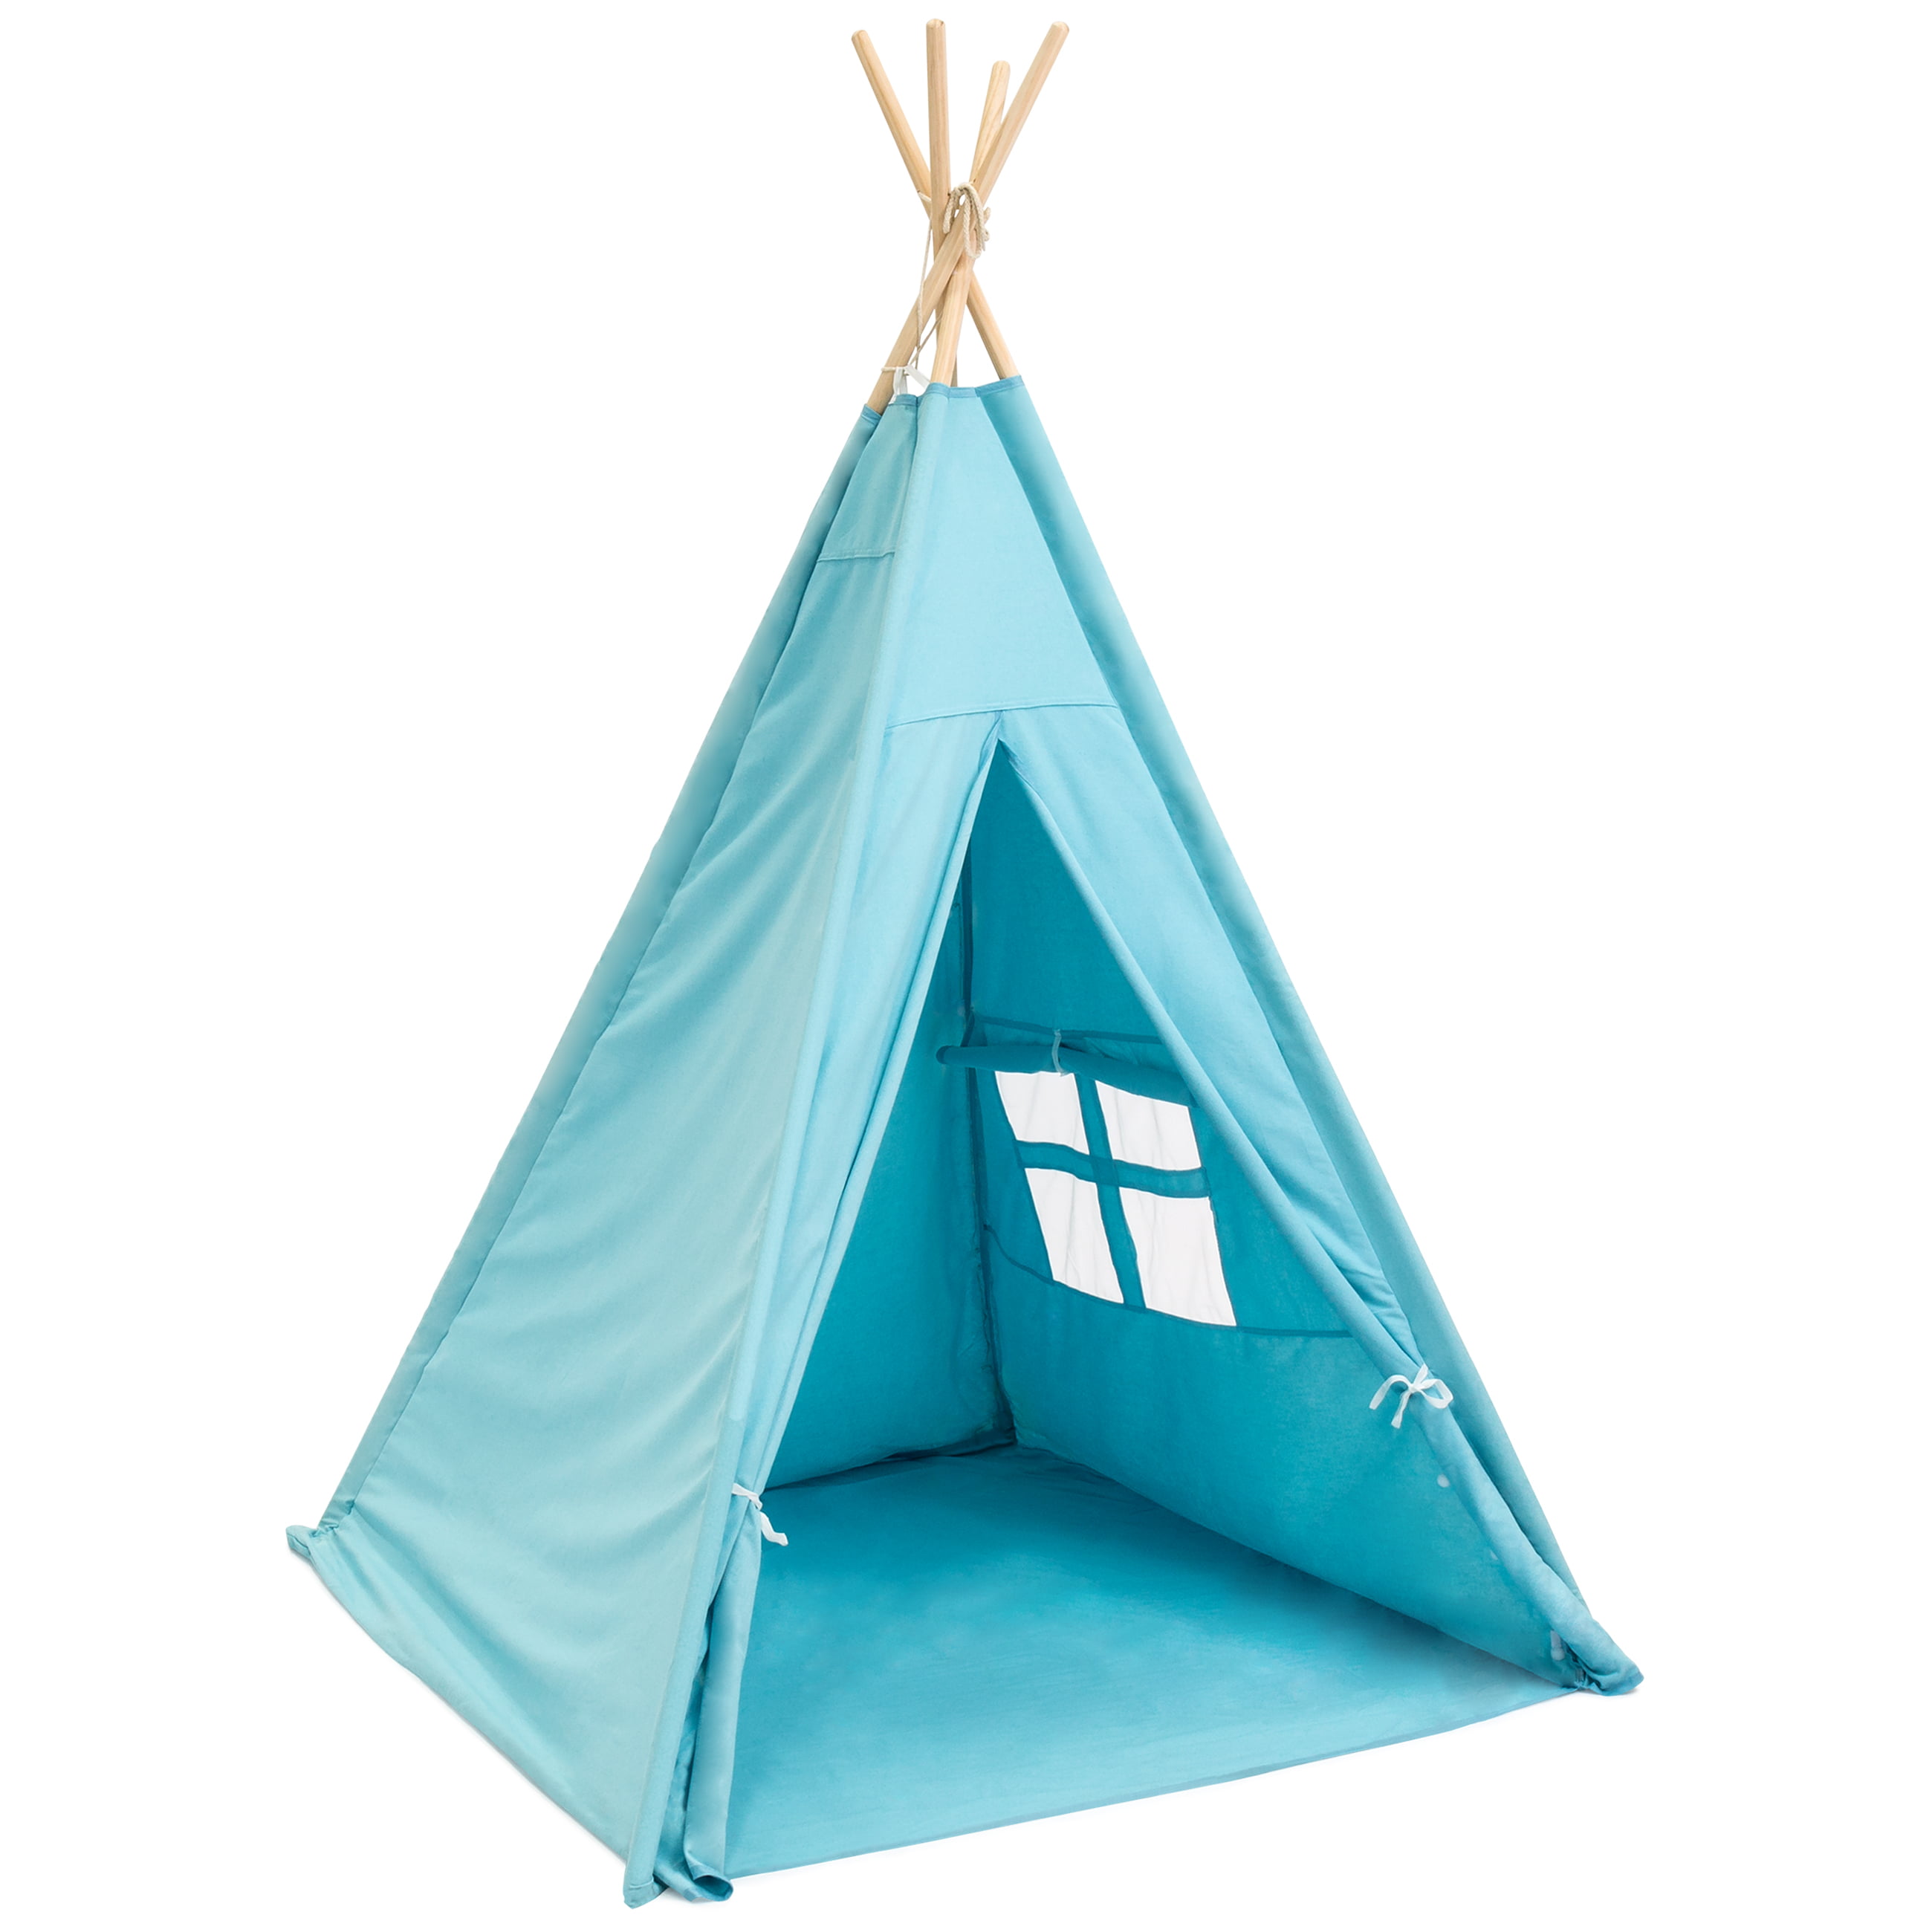 Best Choice Products 6ft Kids Cotton Canvas Teepee Playhouse Sleeping ...